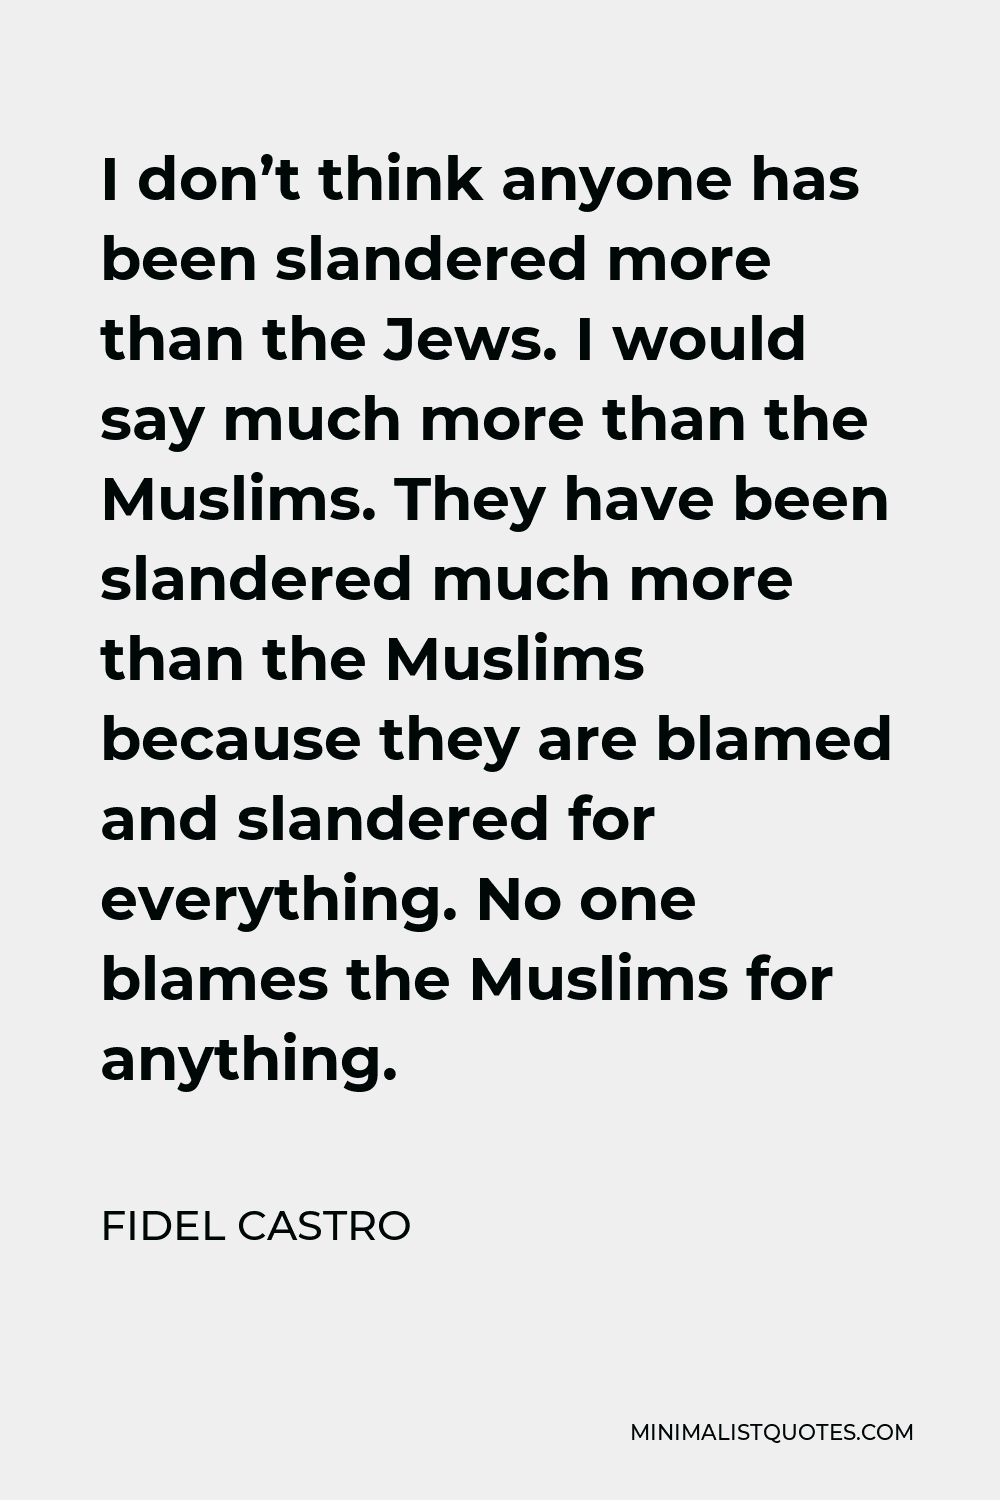 Fidel Castro Quote - I don’t think anyone has been slandered more than the Jews. I would say much more than the Muslims. They have been slandered much more than the Muslims because they are blamed and slandered for everything. No one blames the Muslims for anything.